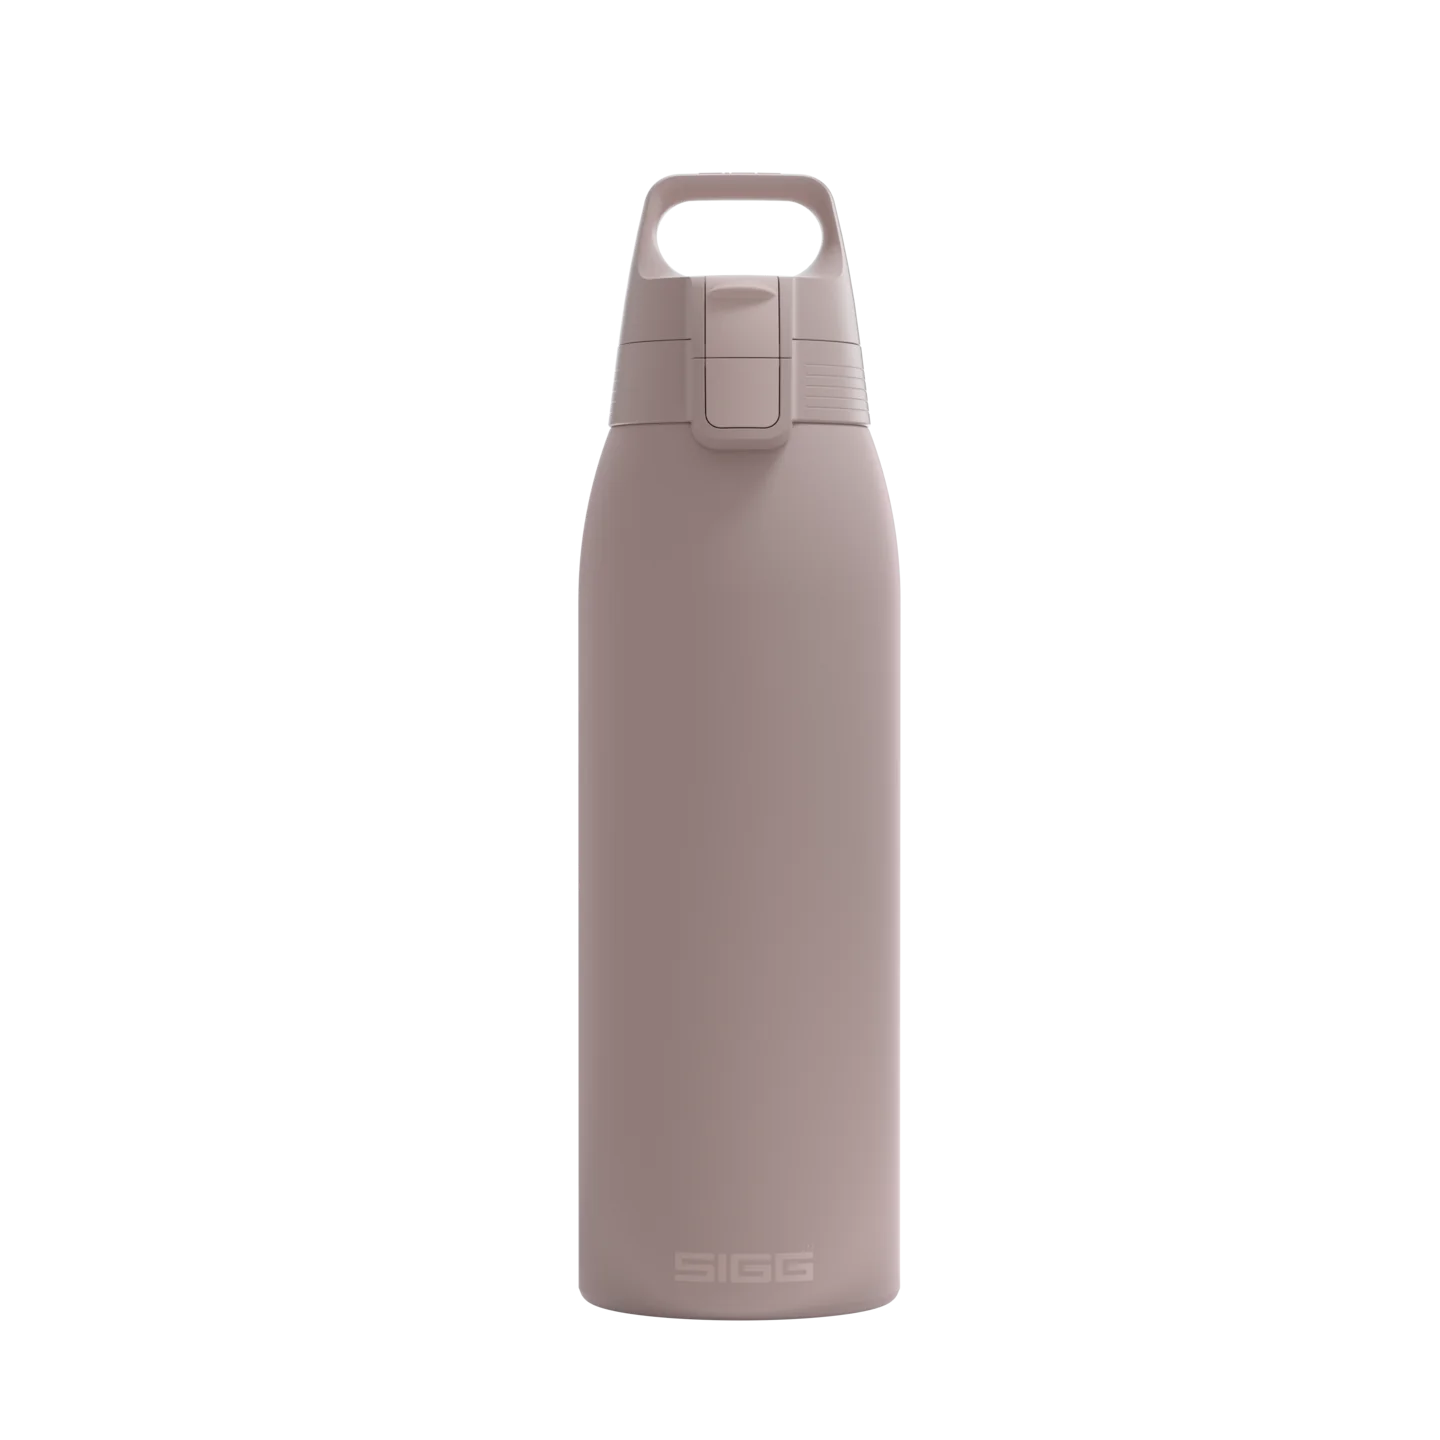 SIGG - Shield Therm One - Recycled stainless steel - Weekendbee - sustainable sportswear